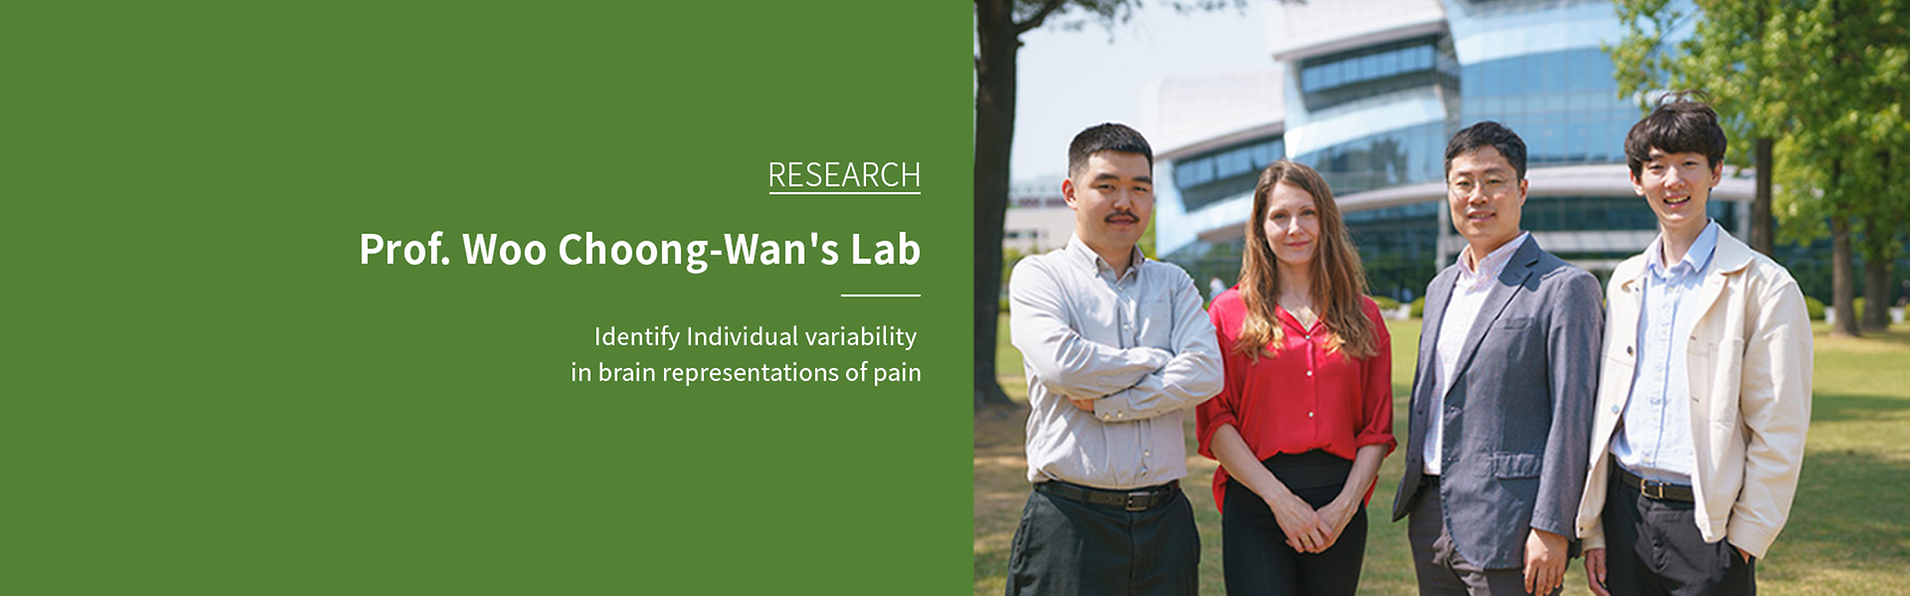 Prof. Woo Choong-Wan's Lab published in Nature Neuroscience